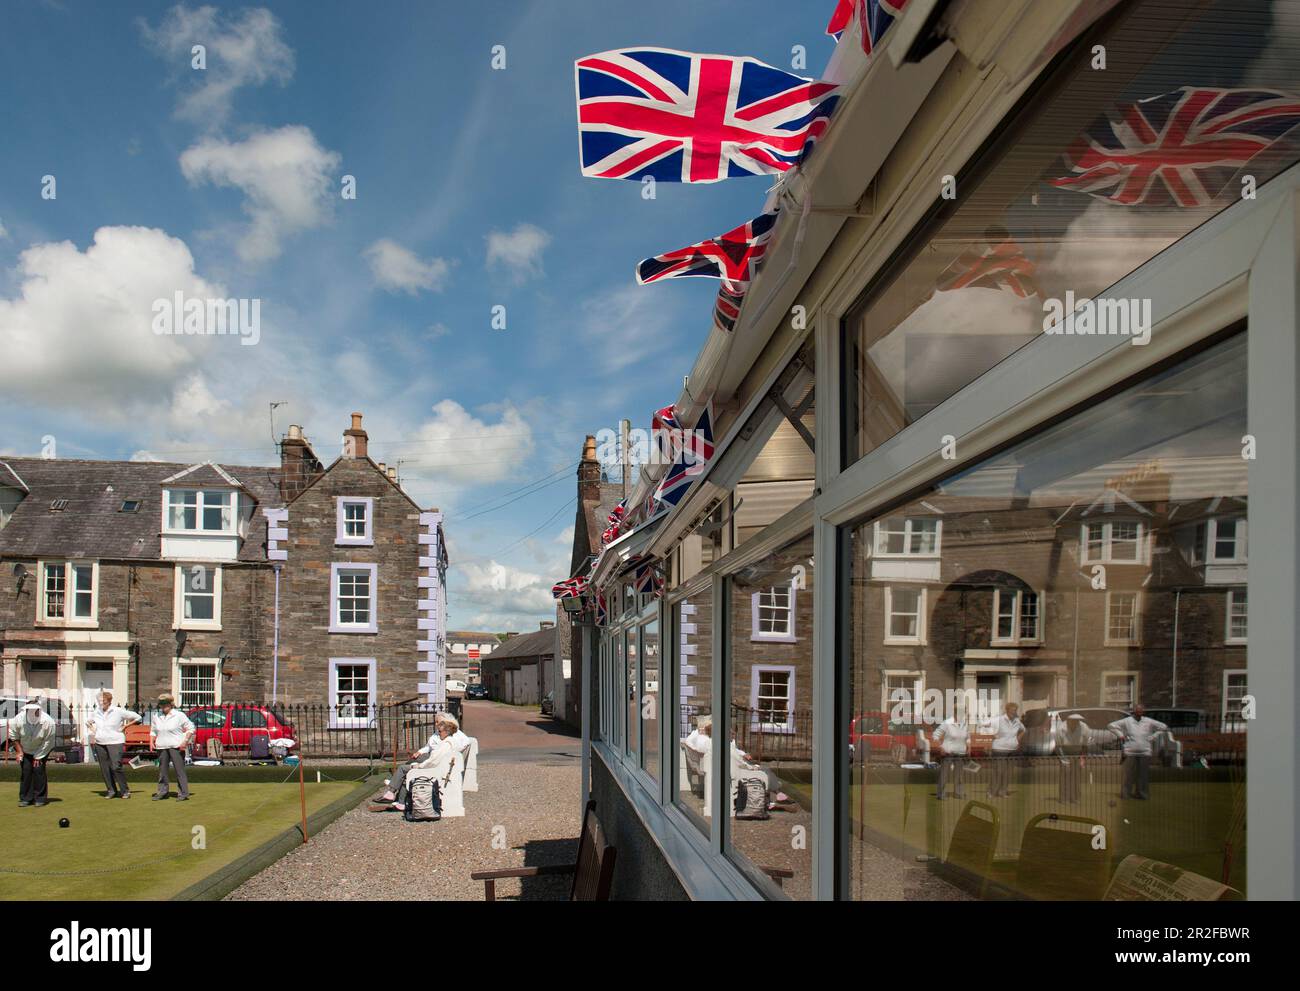 Bowls in play is reflected in the pavilion windows below union jack bunting at the Kirkcudbright lawn bowling green in Dumfries and Galloway, Scotland Stock Photo